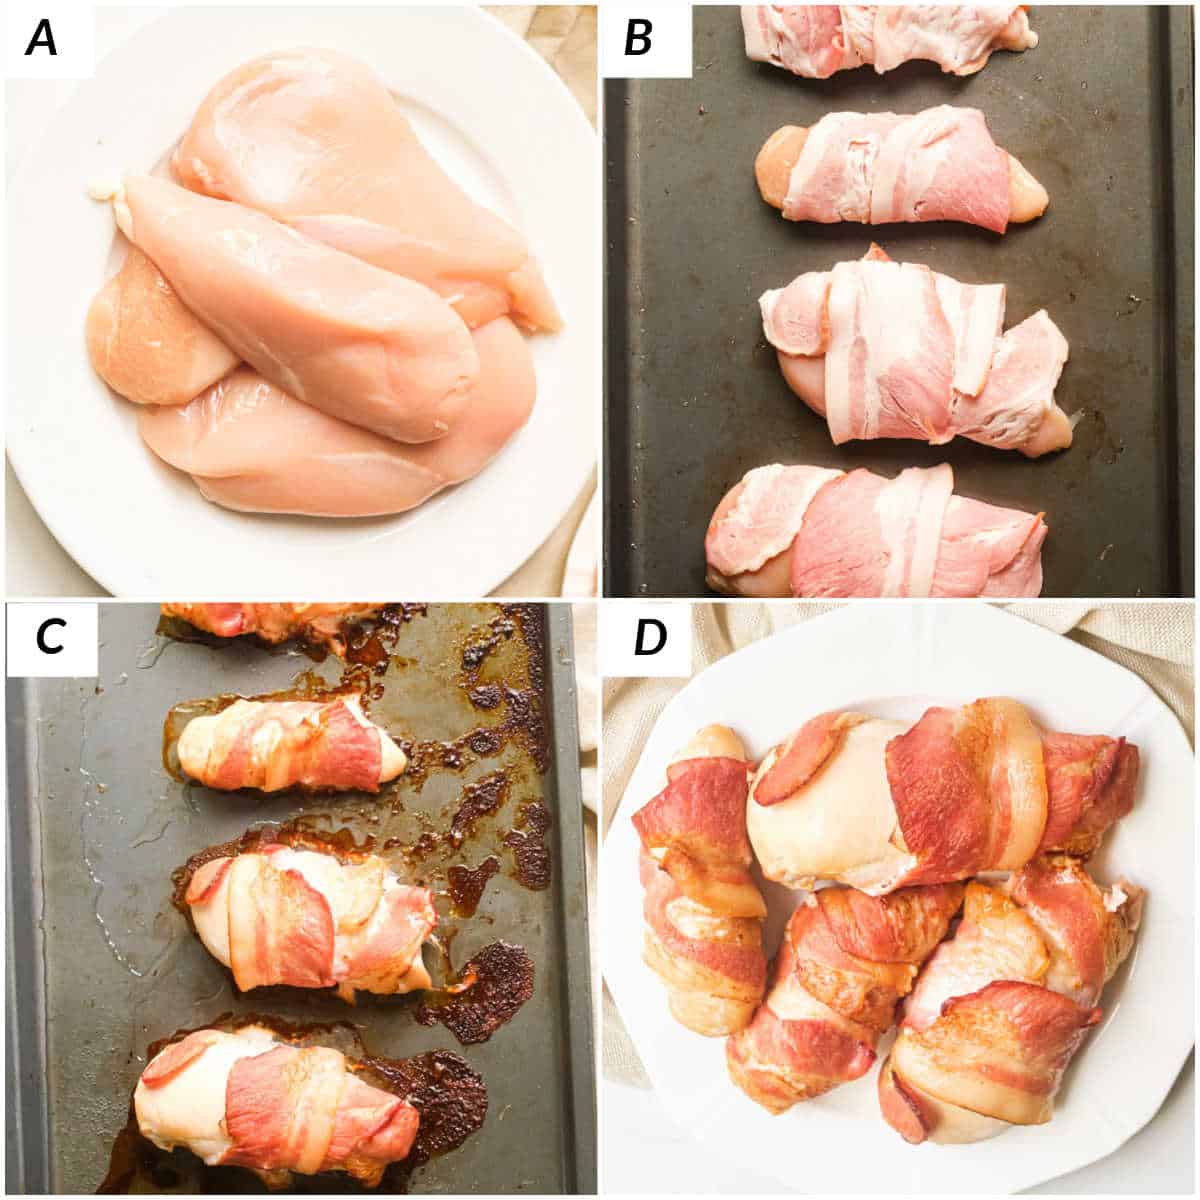 image collage showing the steps for making bacon wrapped chicken breast